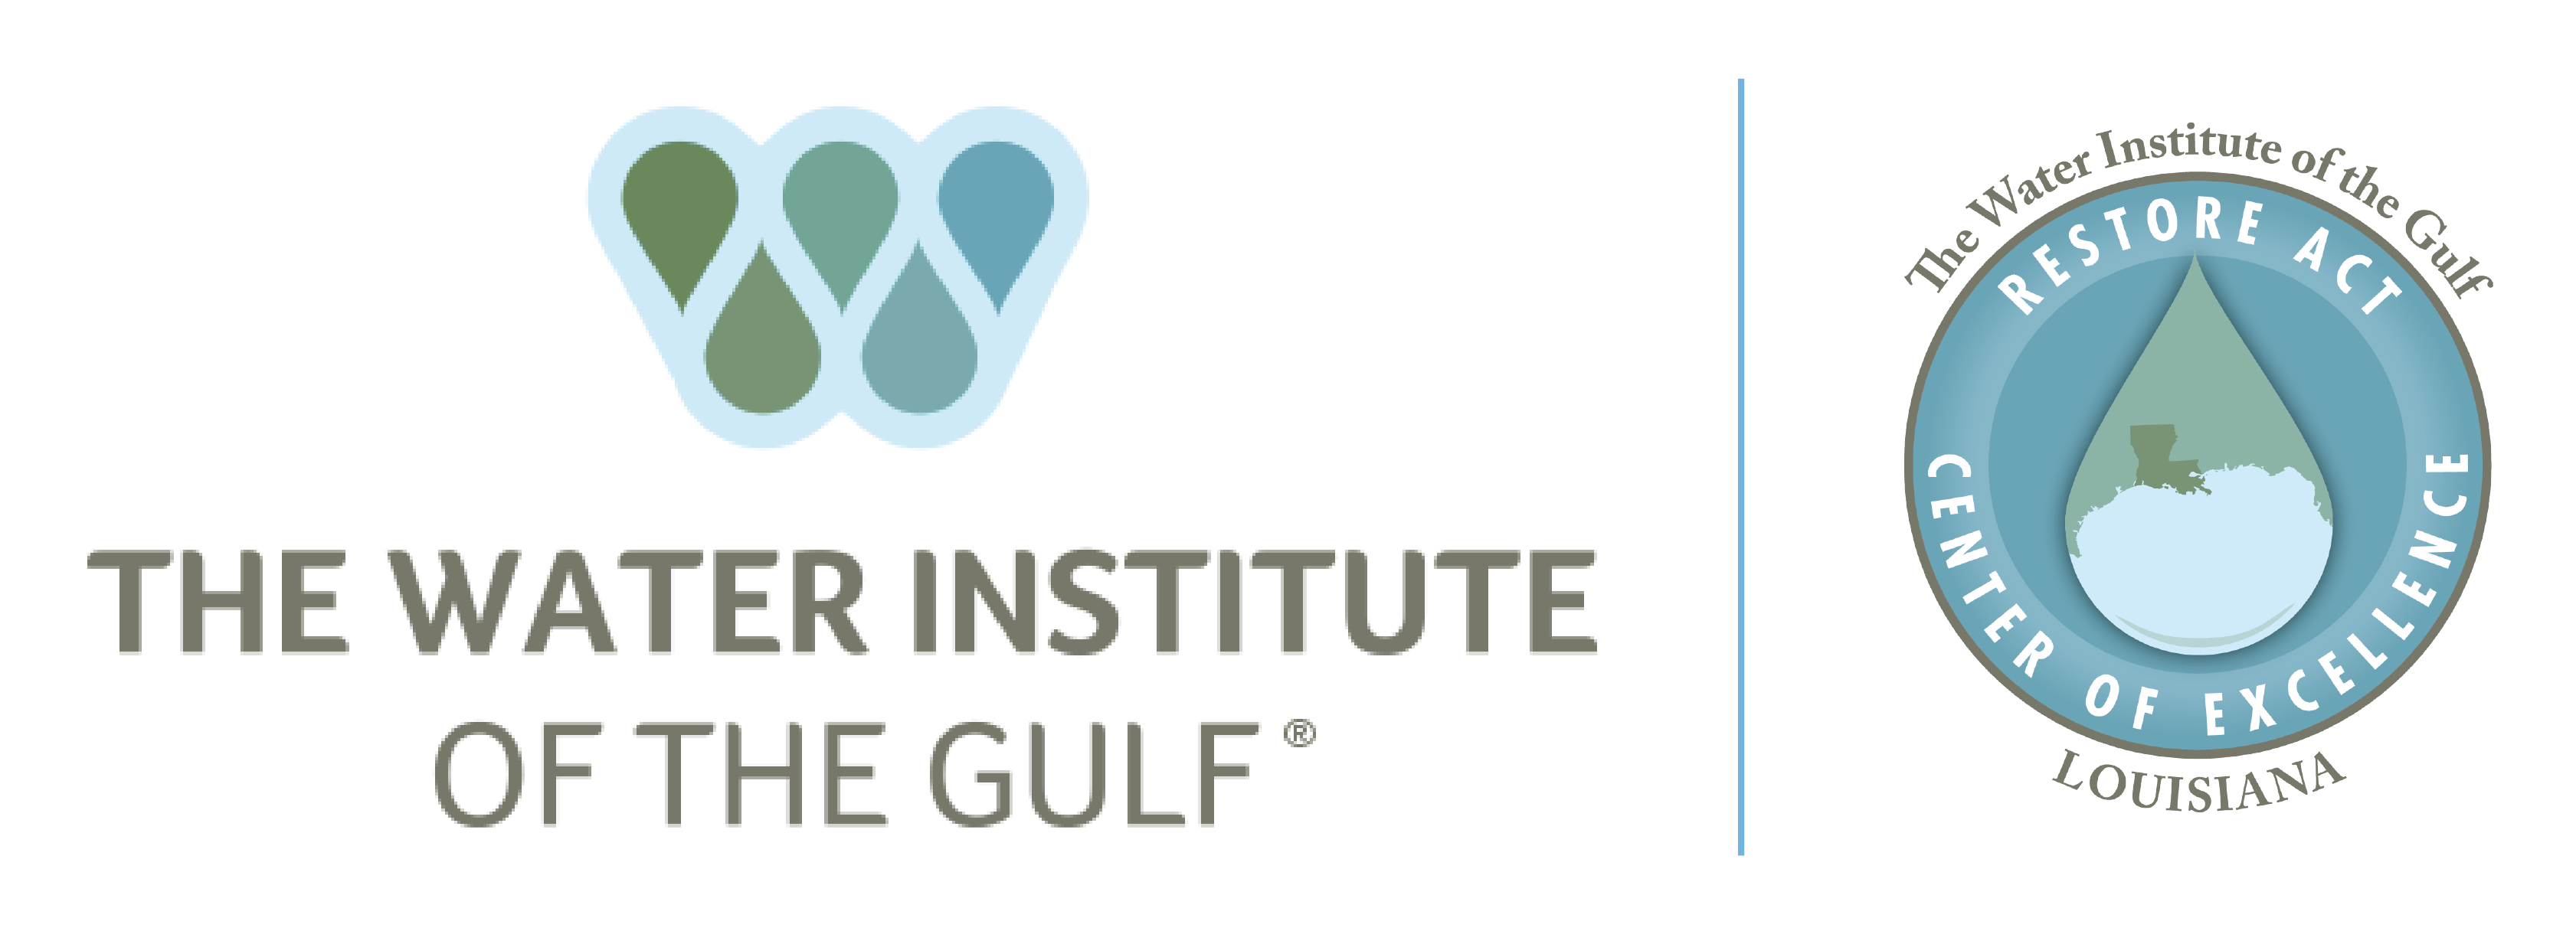 logo of the Water Institute of the Gulf and logo of the Center of Excellence